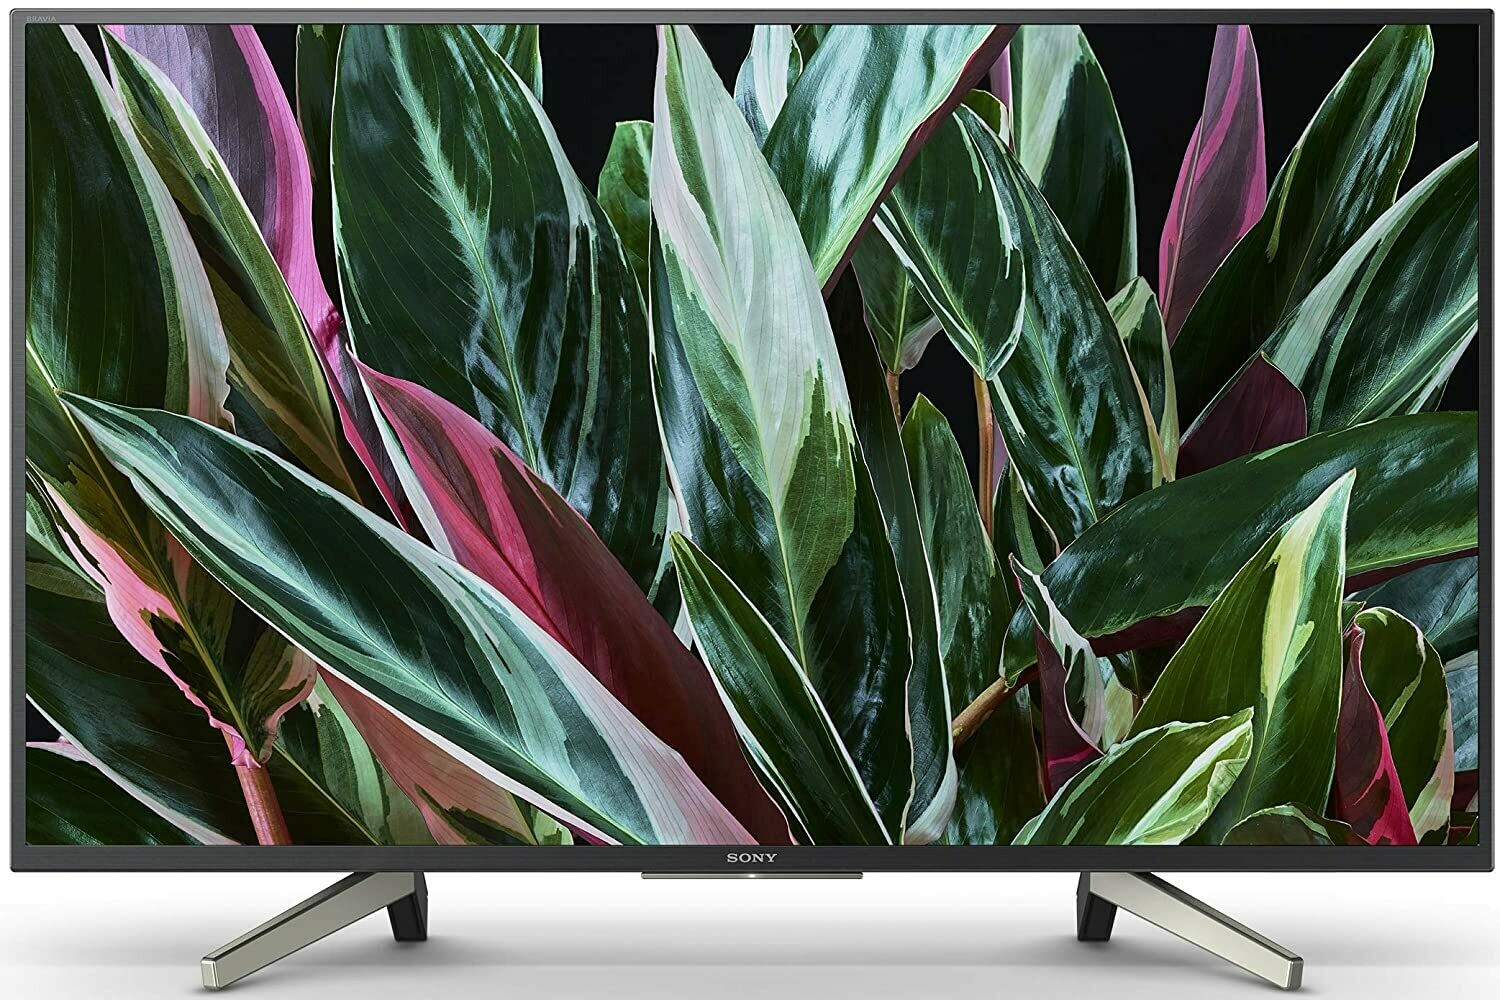 Sony Bravia 123 cm (49 Inches) Full HD Certified Android Smart LED TV KDL-49W800G